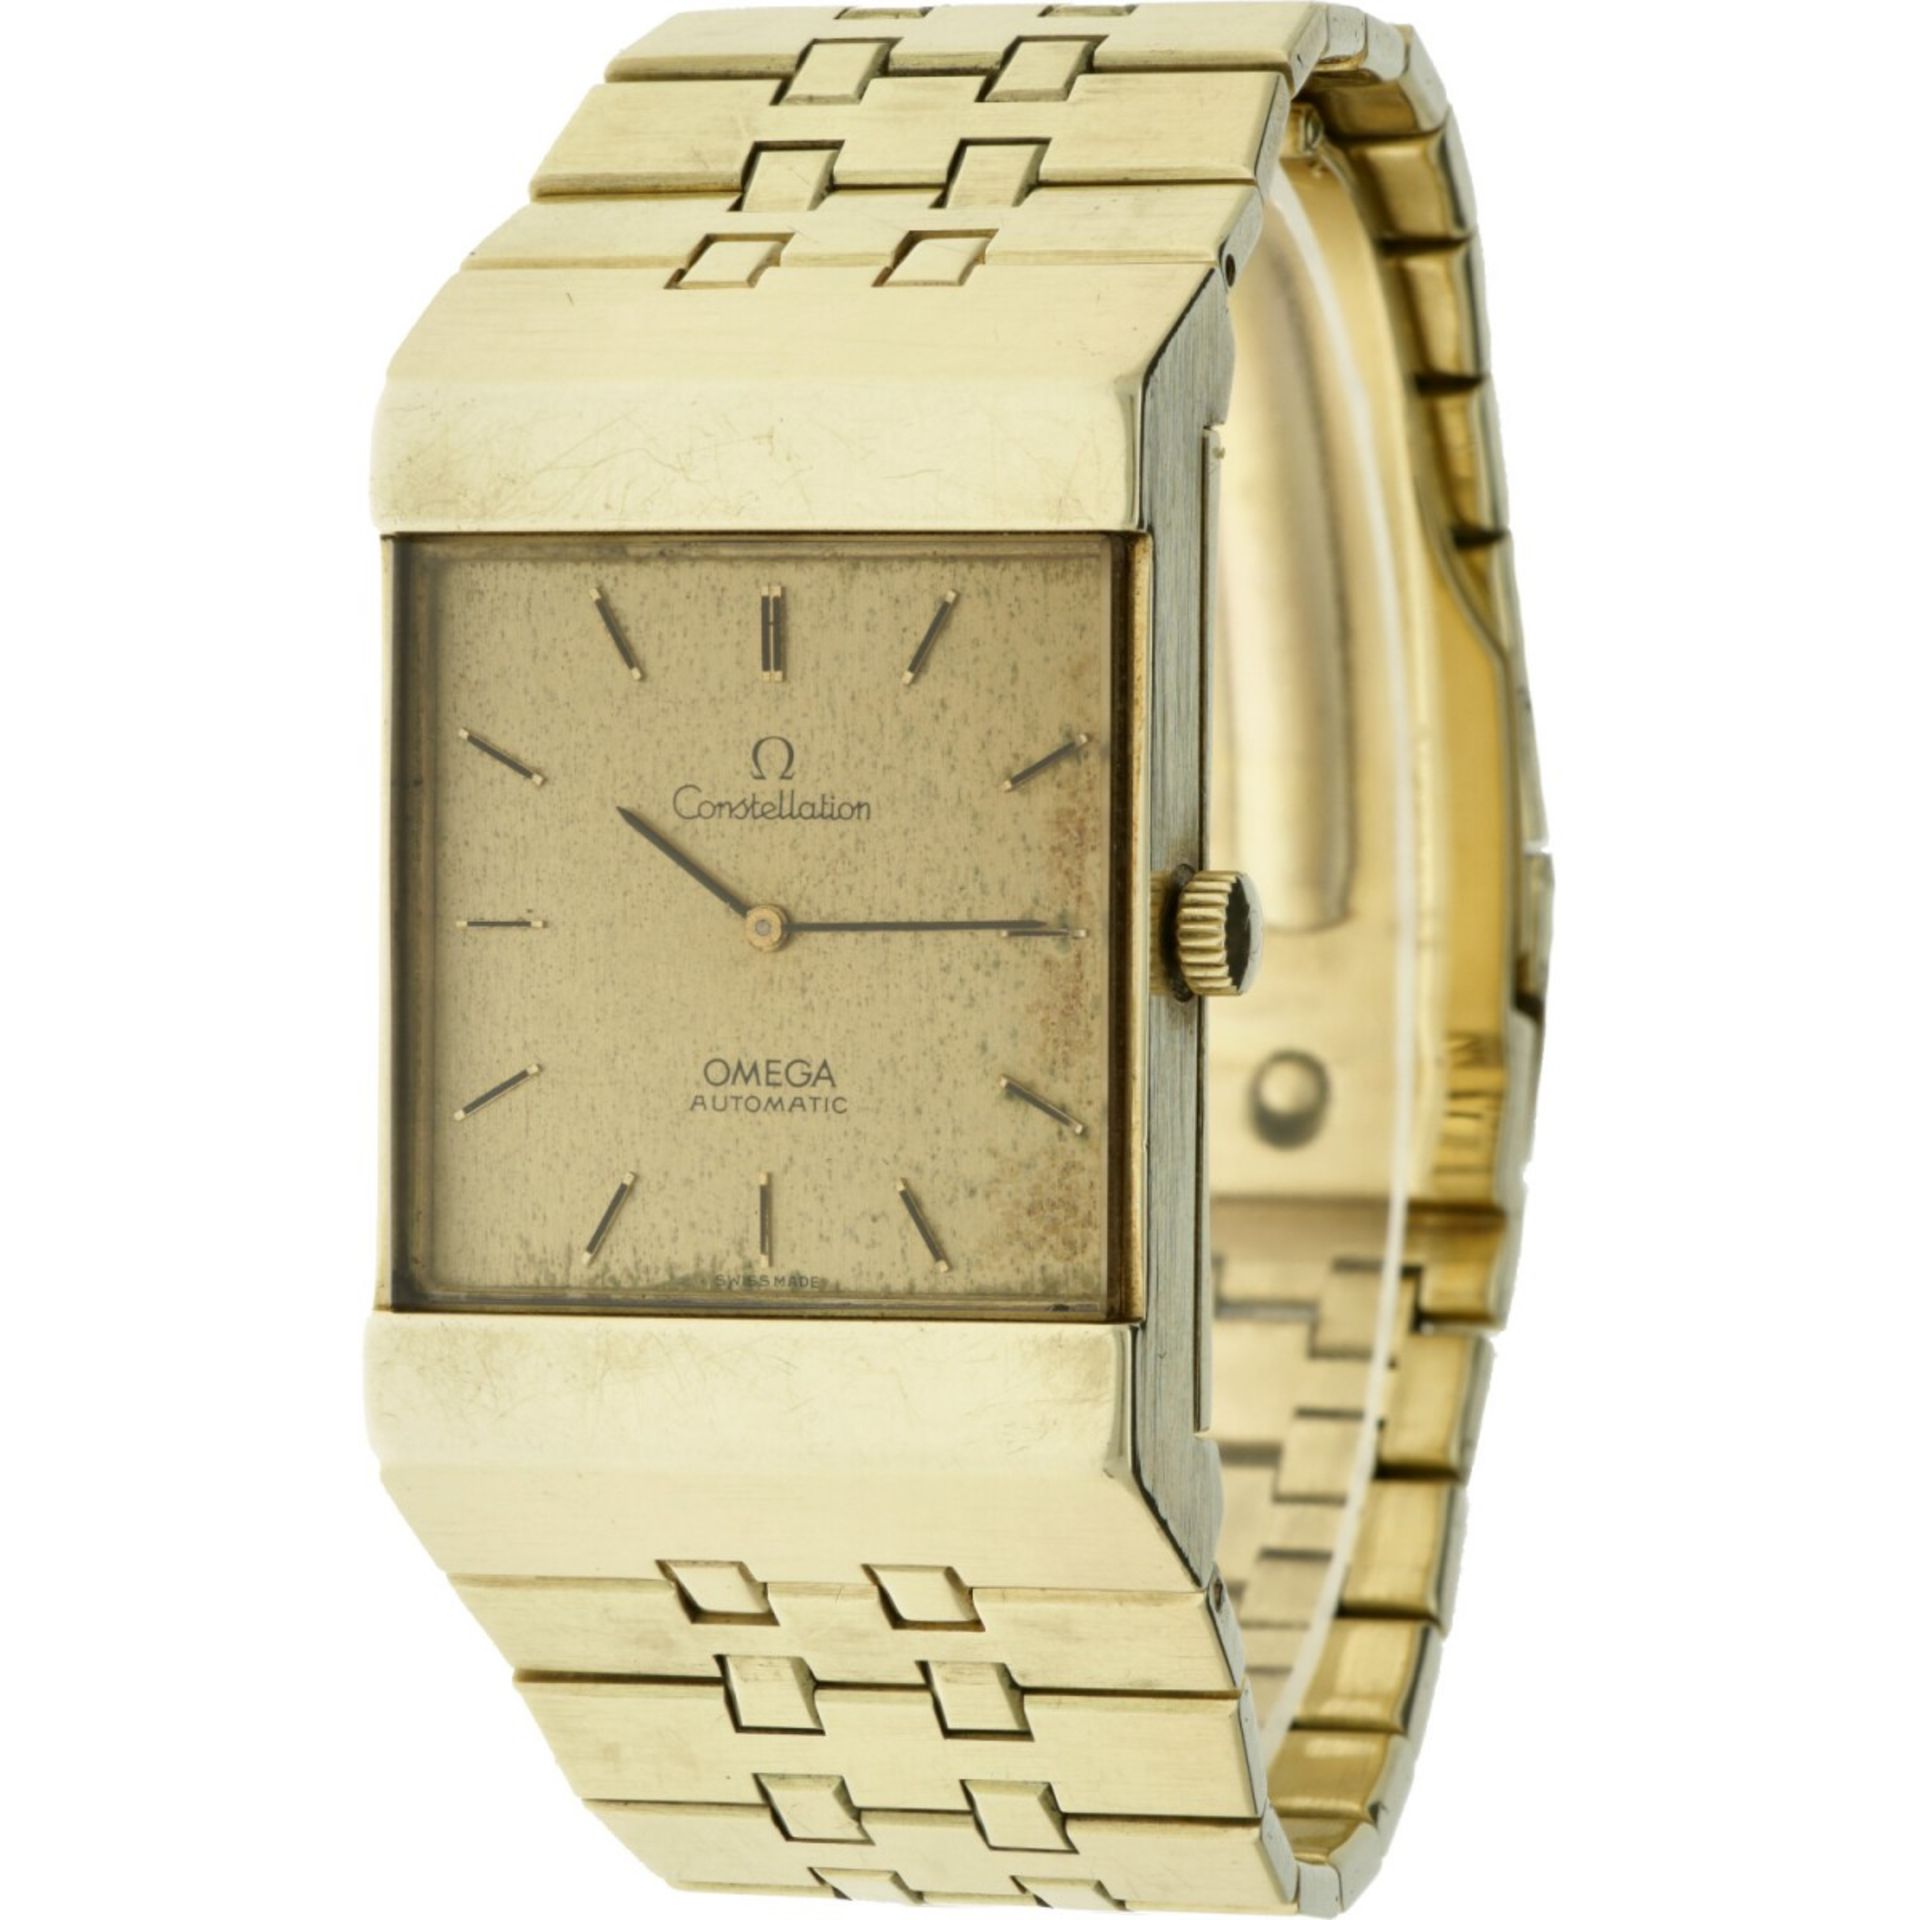 Omega Constellation 8359 - Men's Watch - approx. 1972 - Image 2 of 9